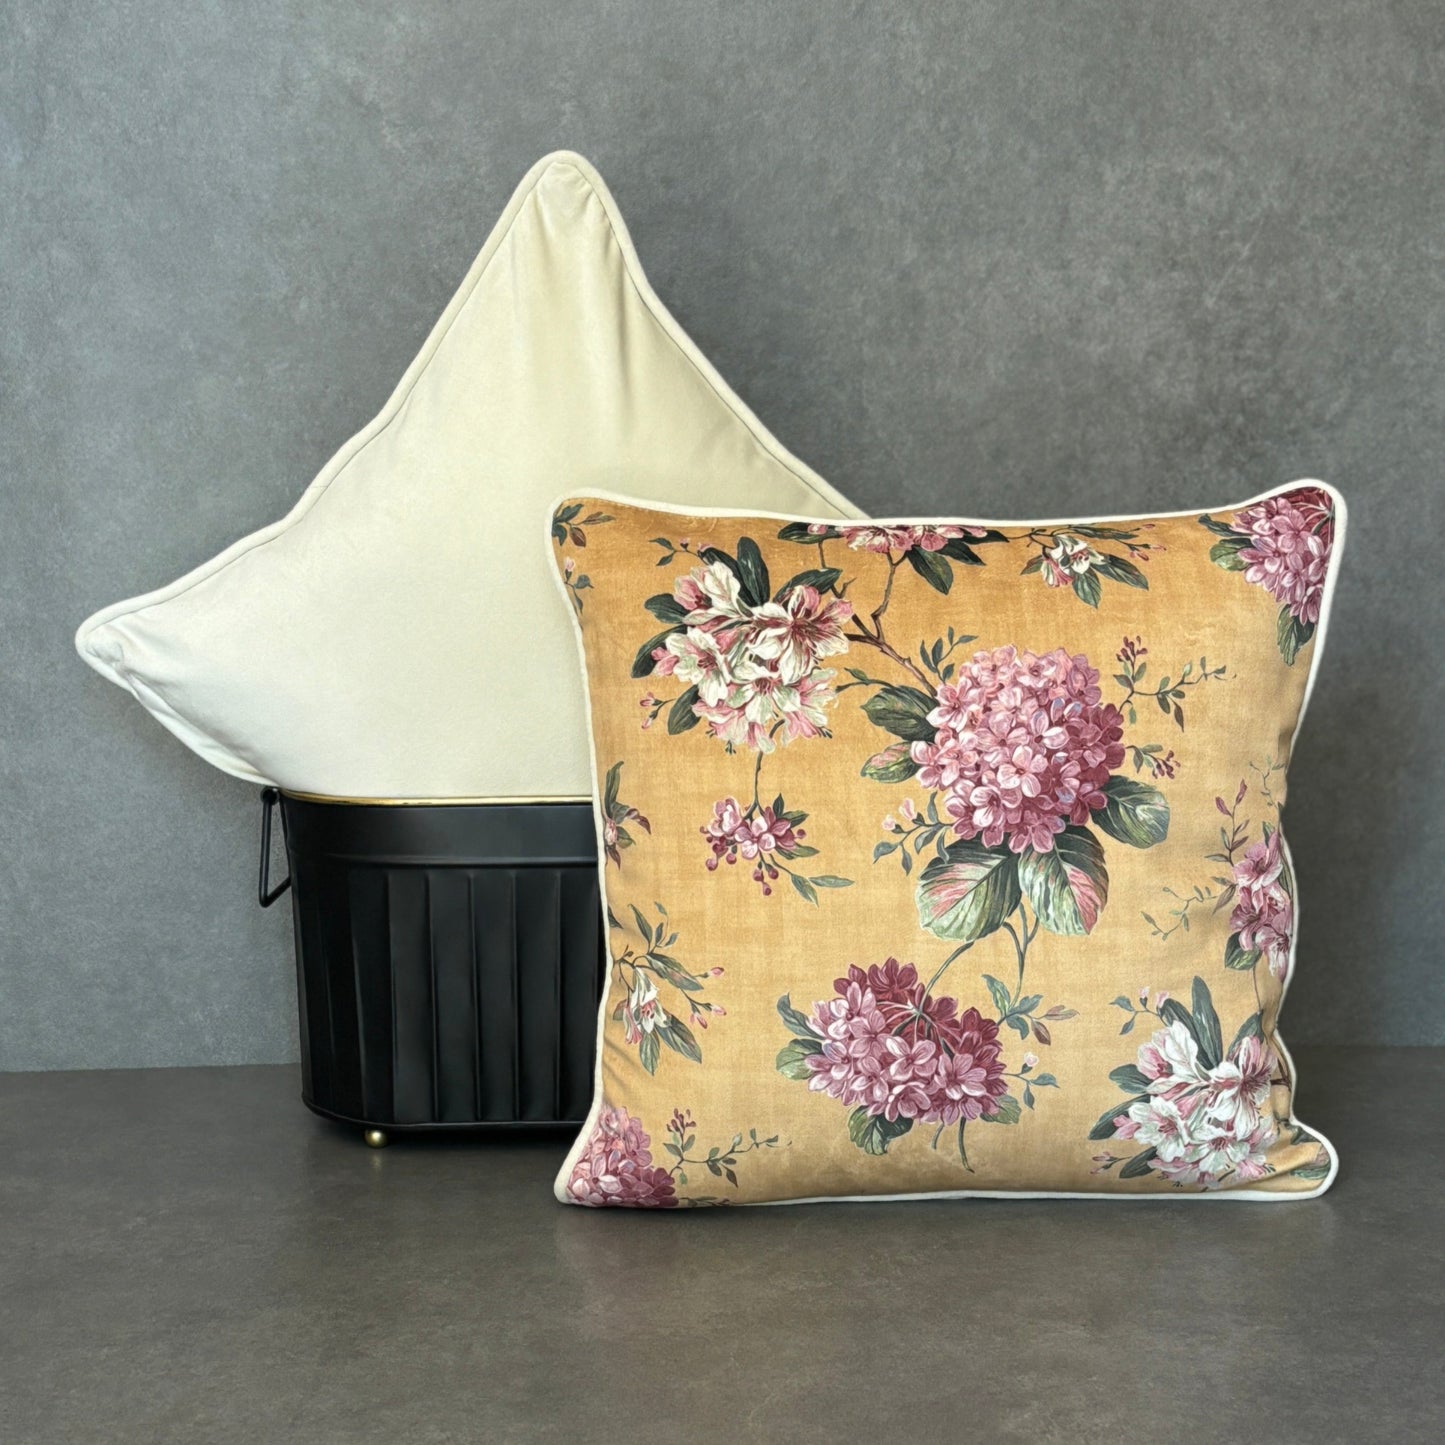 Yellow Floral Velvet Cushion Cover 16 x 16